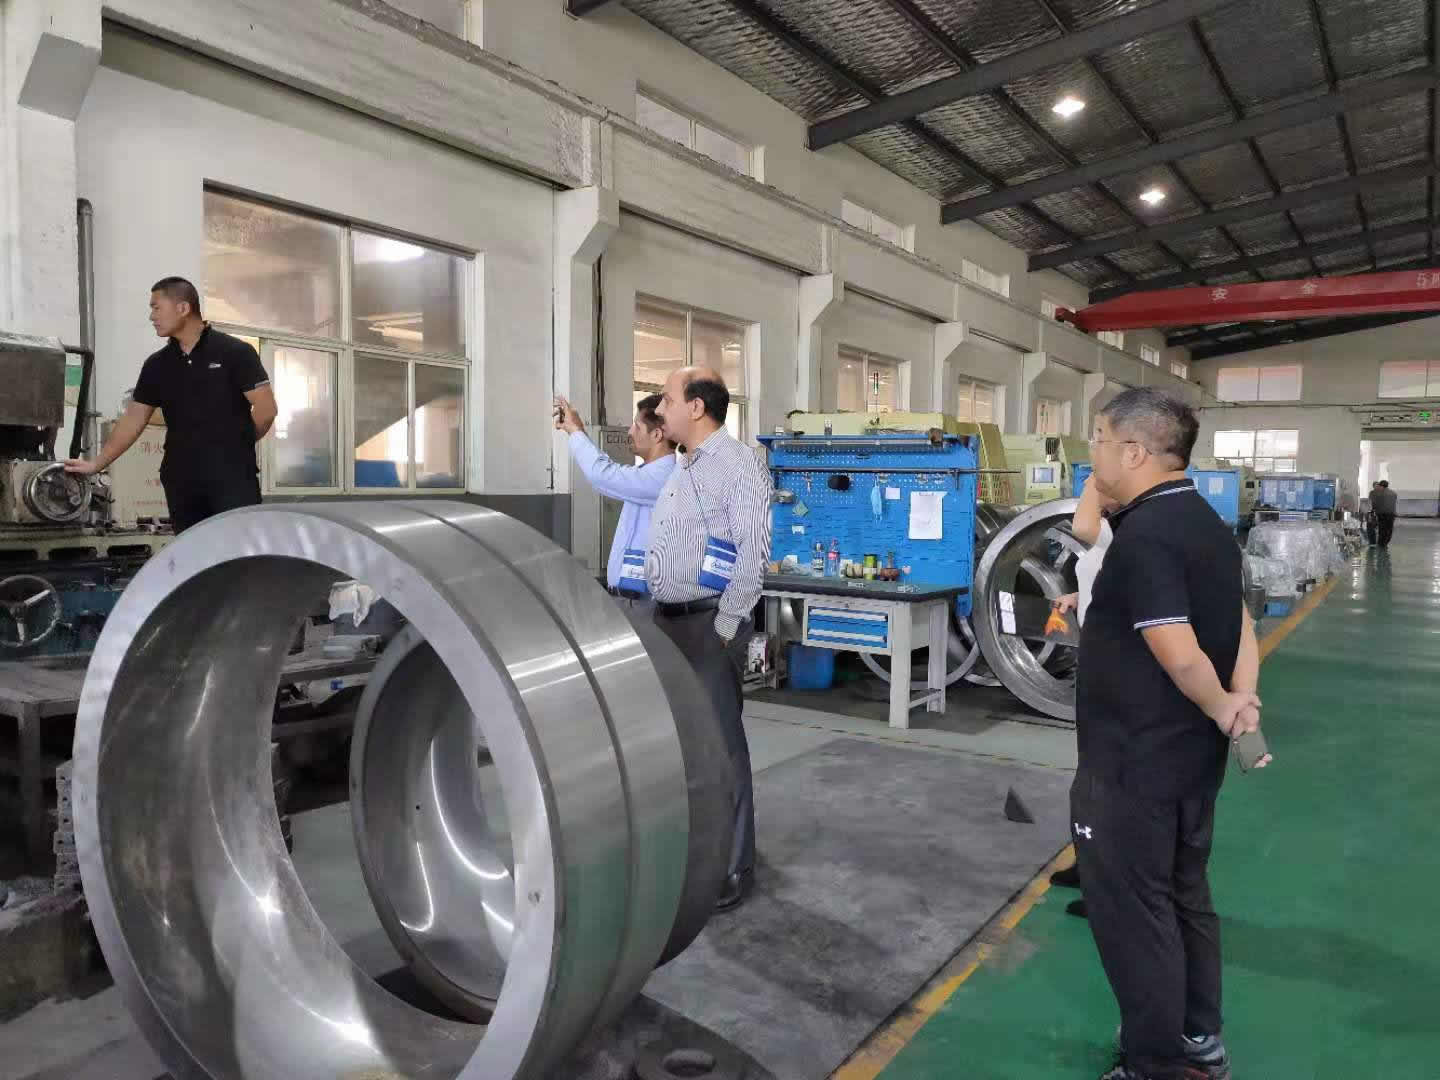 Middle East customers come to FV BEARING company to inspect industrial bearings